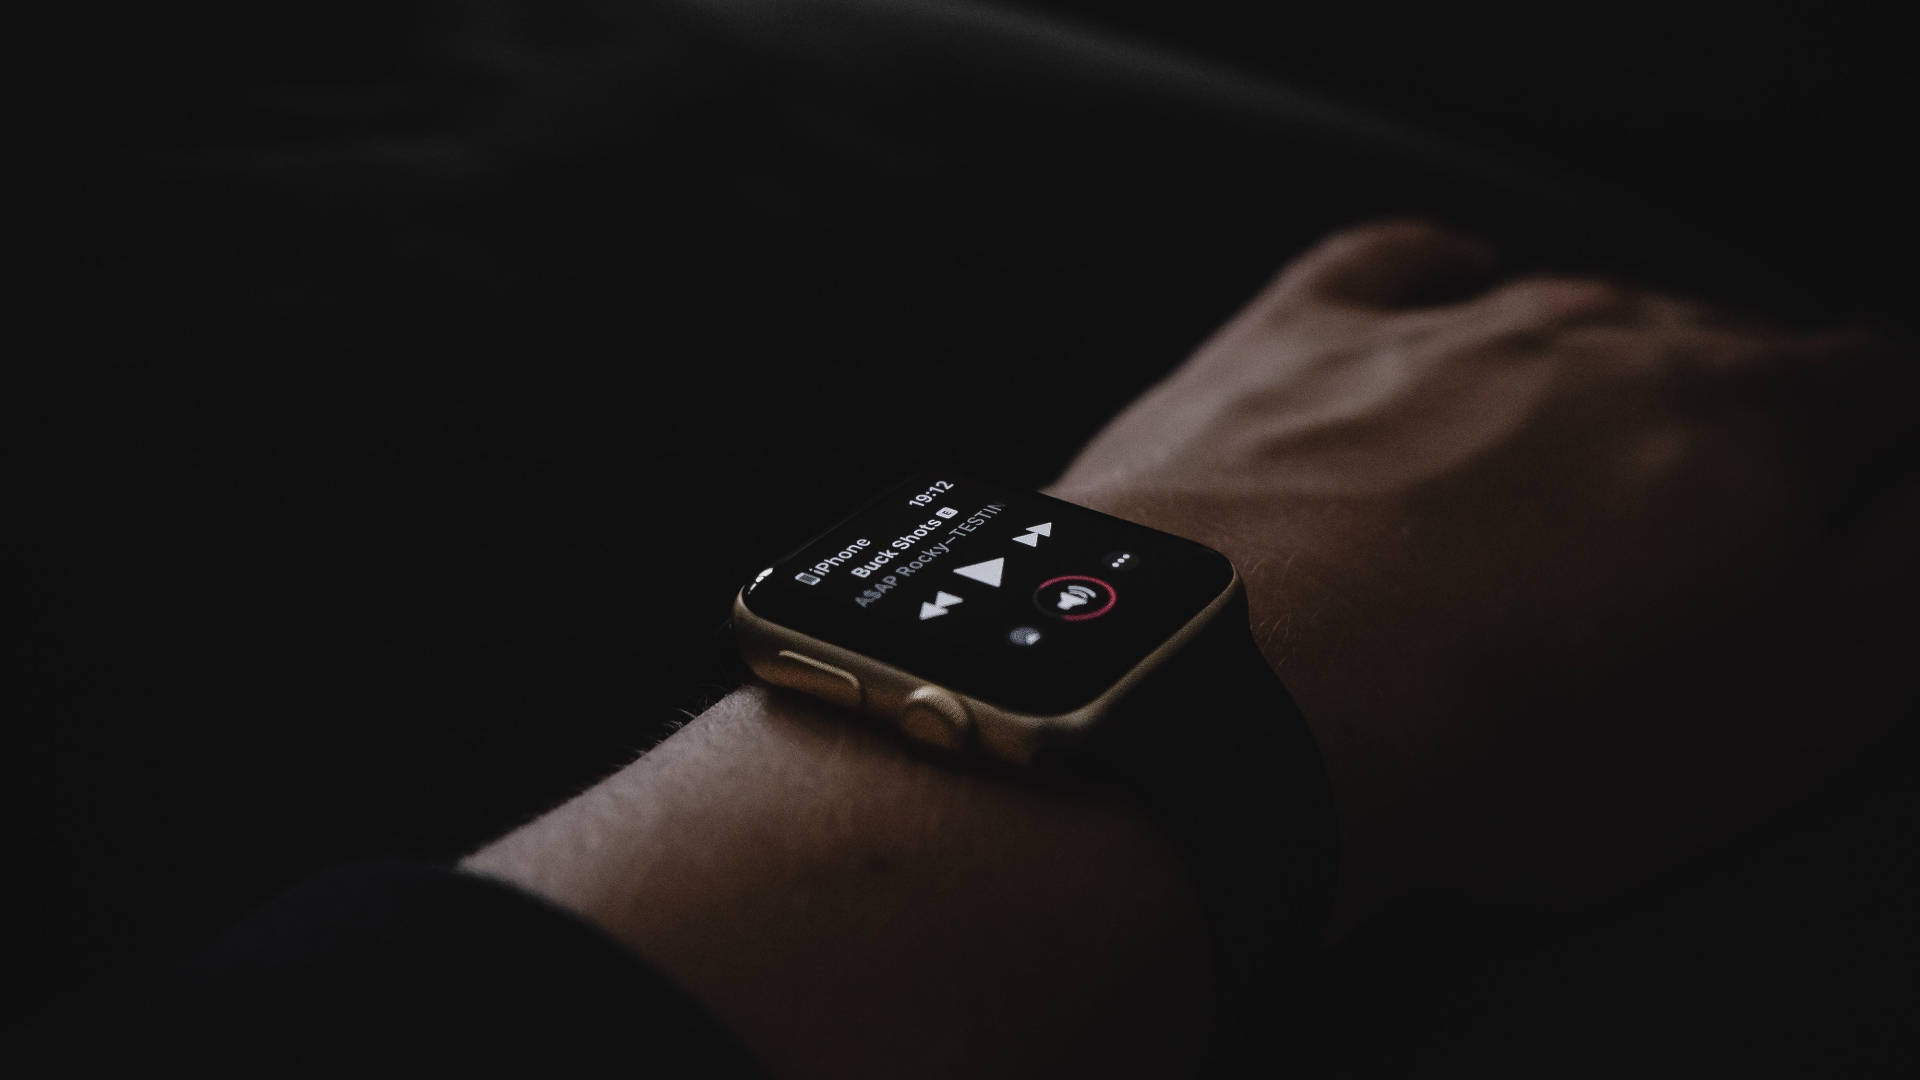 Apple Watch With Pitch-Black Straps Wallpaper